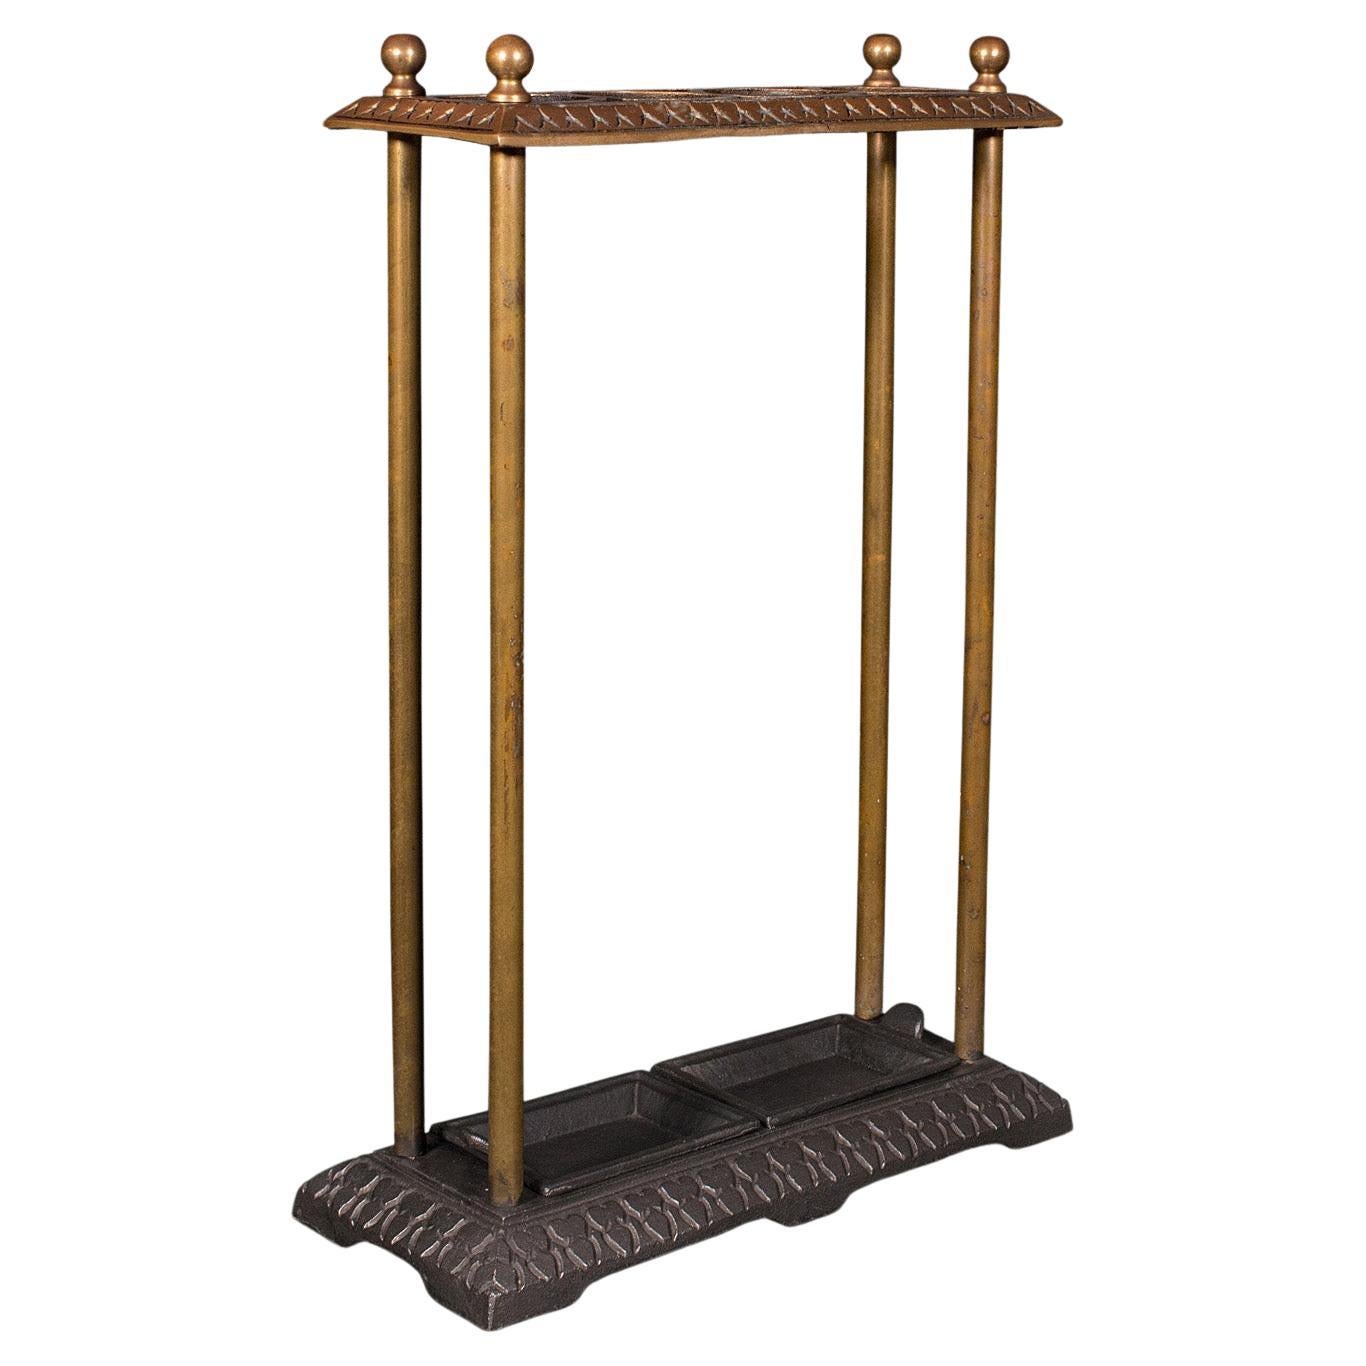 Antique Sectional Umbrella Stand, English, Bronze, Iron, Hall Rack, Victorian For Sale